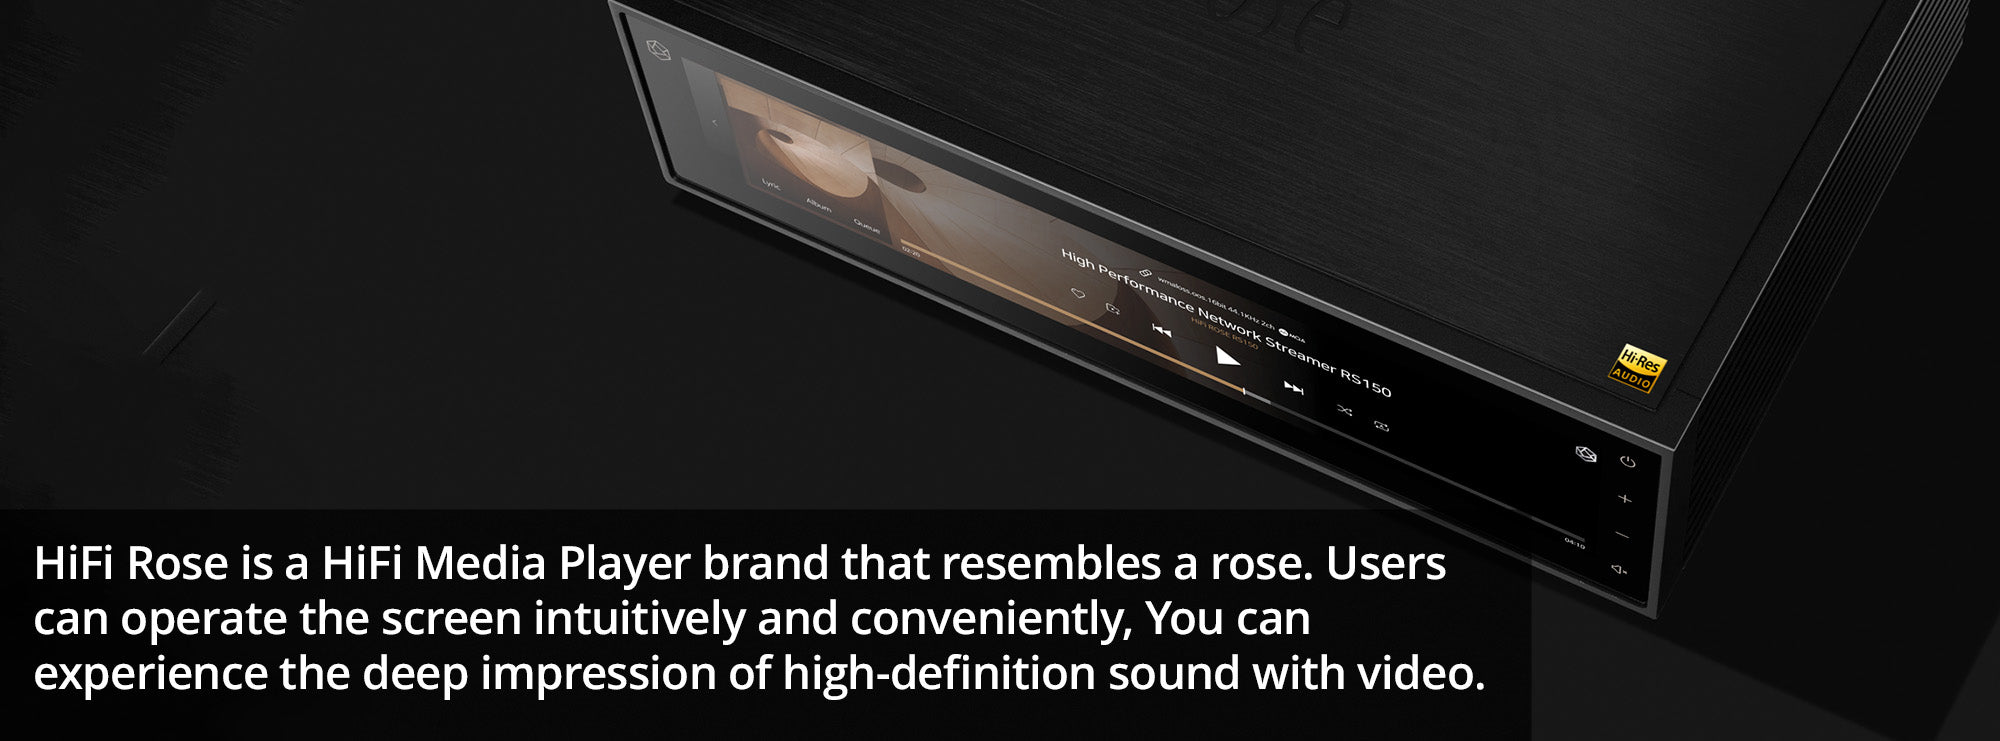 HiFi Rose is a HiFi Media Player brand that resembles a rose. Users can operate the screen intuitively and conveniently, You can experience the deep impression of high-definition sound with video.